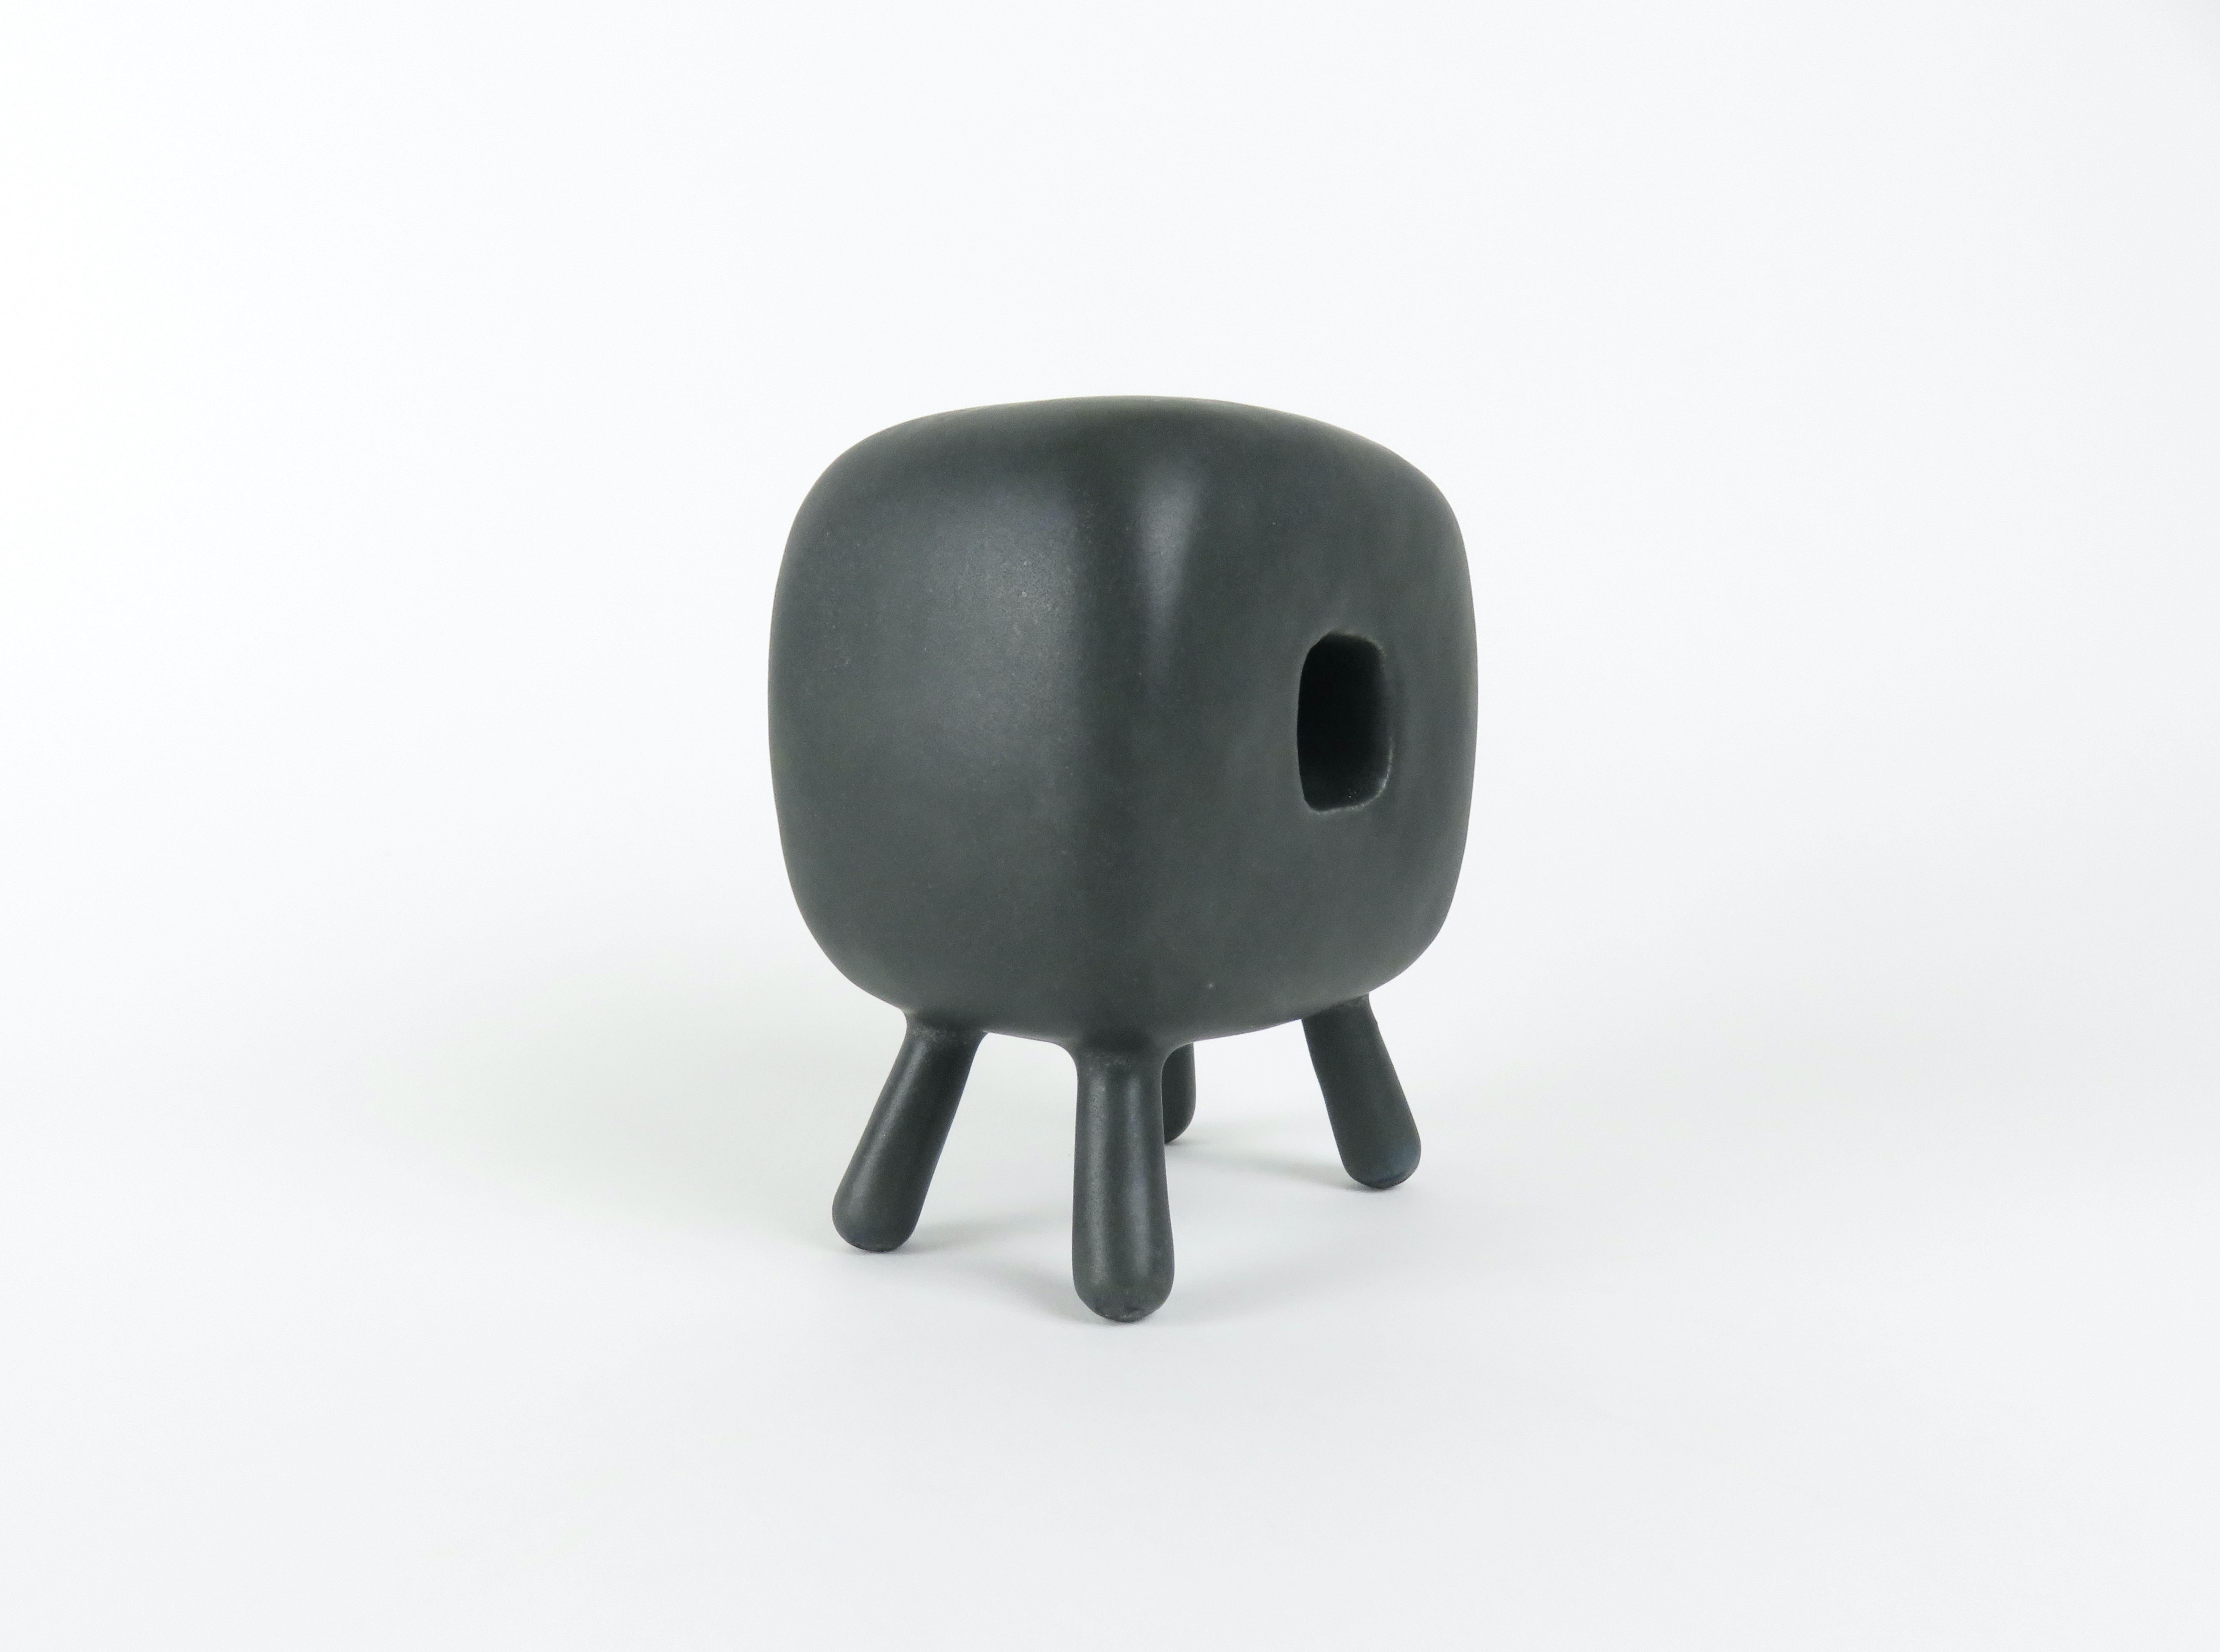 American Smooth Black Glazed Ceramic Cube with Square Center Opening, 4 Legs, Handbuilt